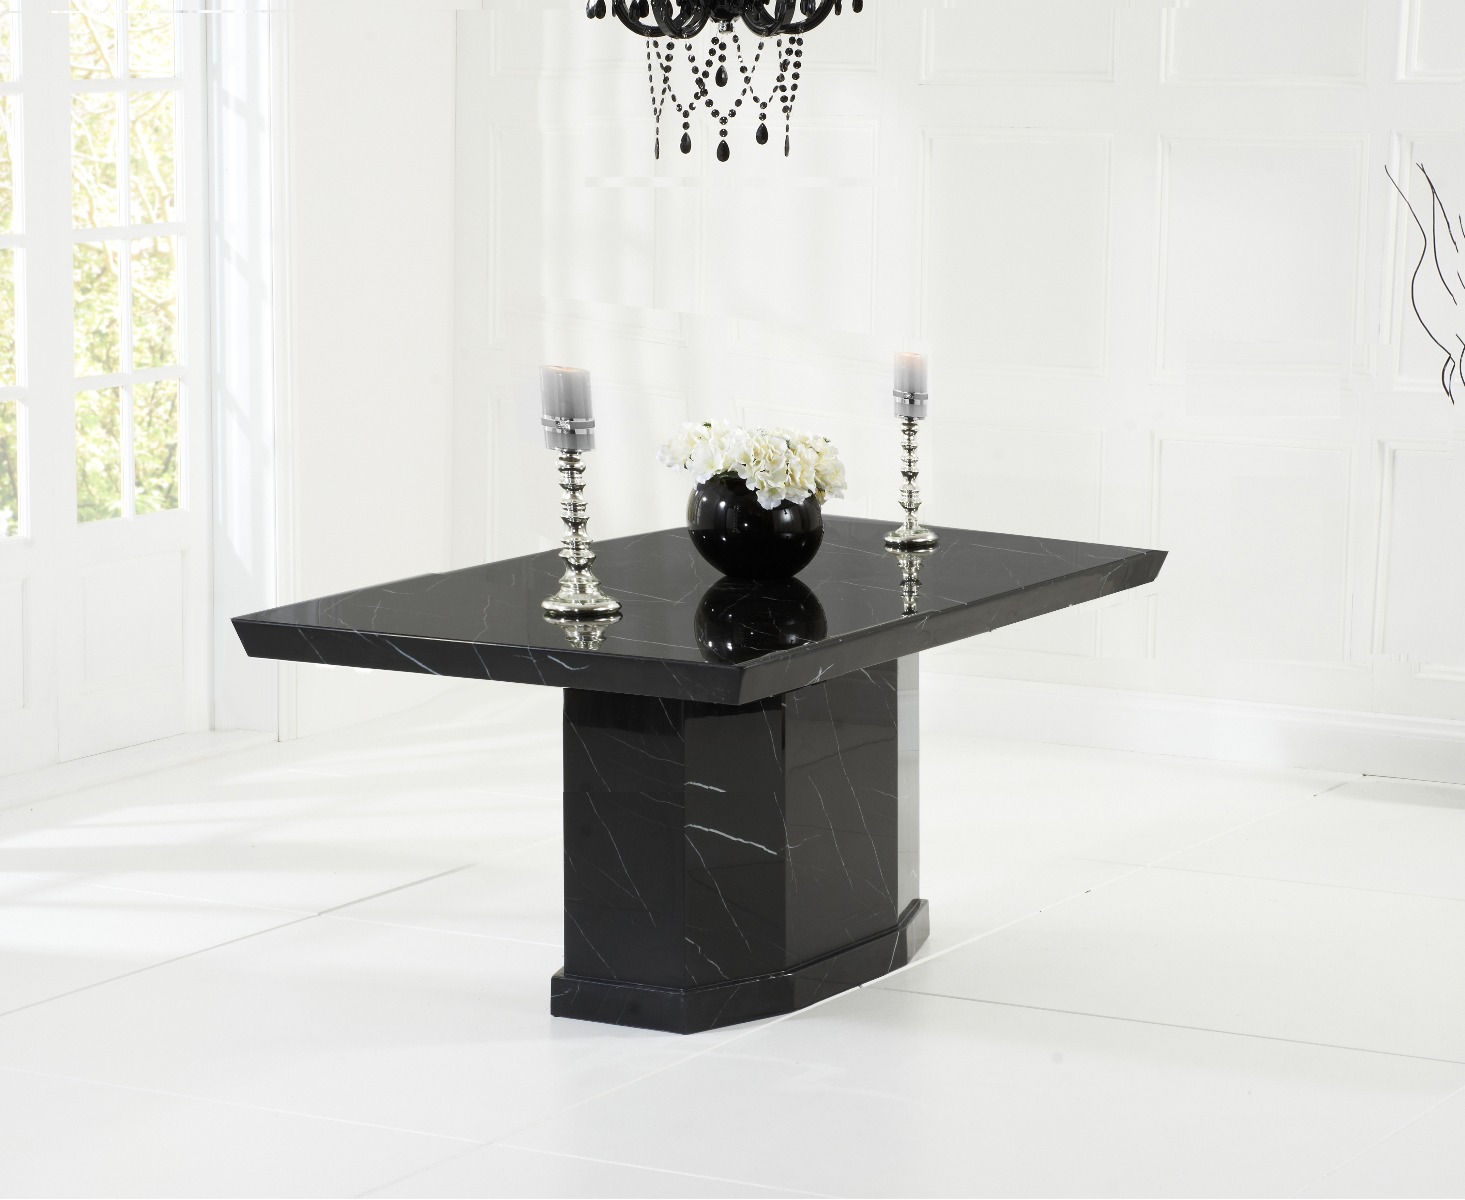 Photo 4 of Carvelle 160cm black pedestal marble dining table with 8 black novara chairs